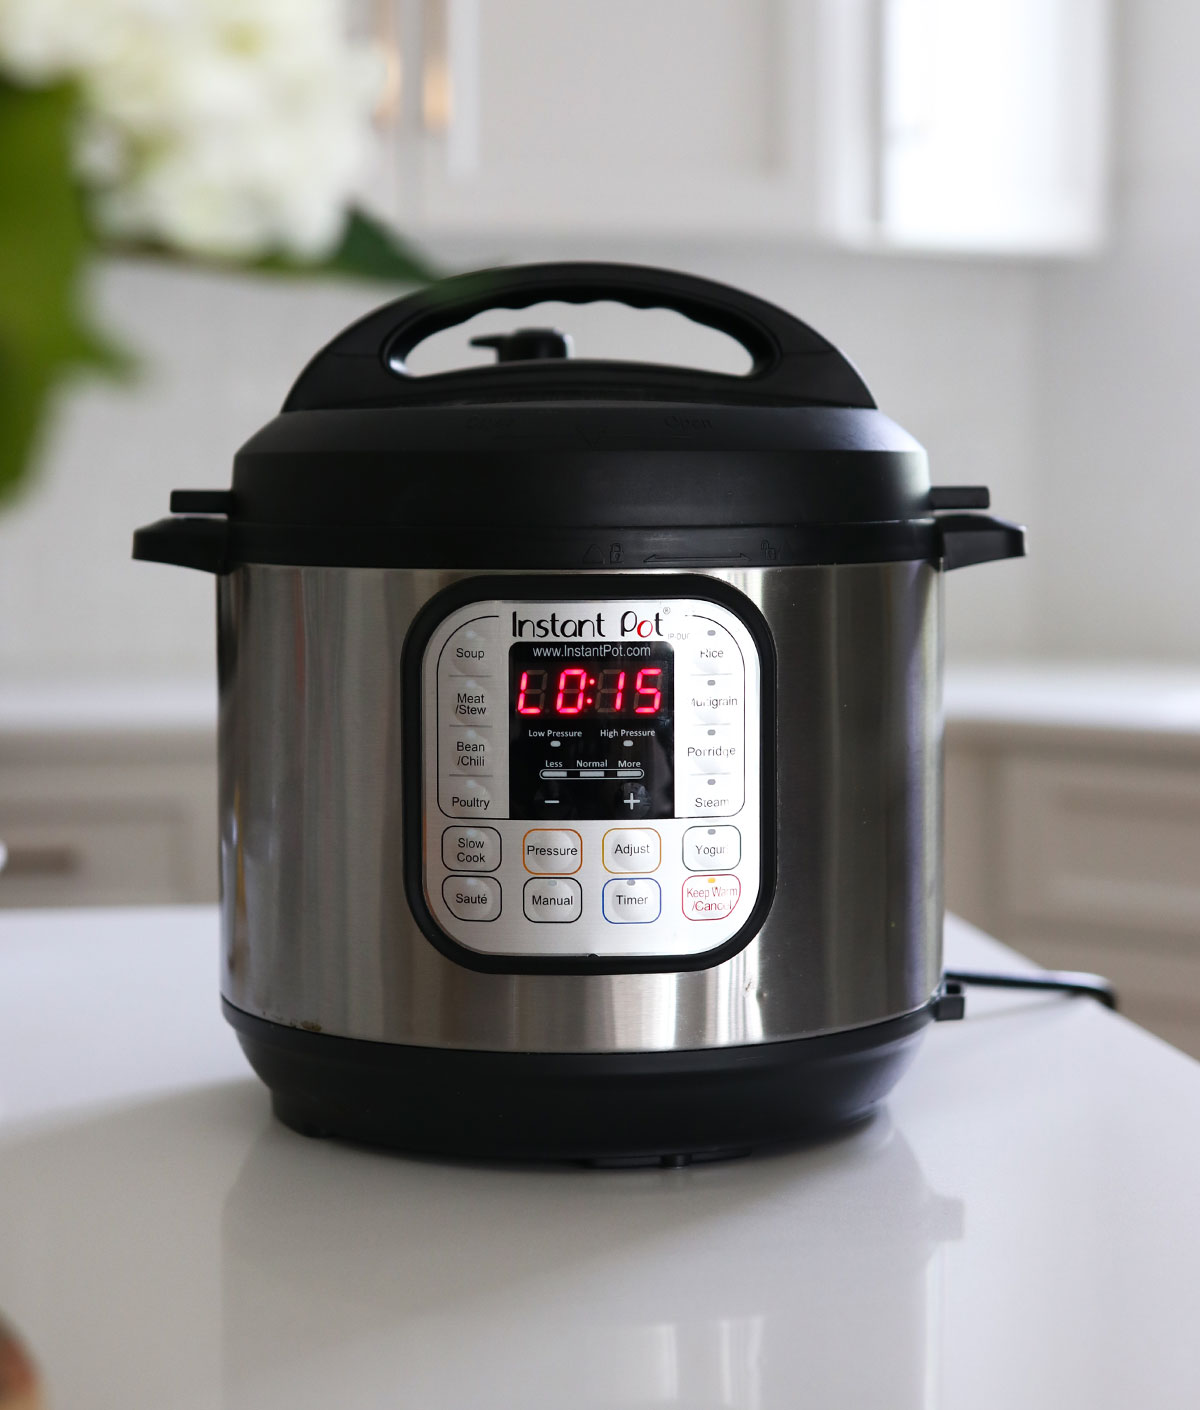 Instant pot showing that it has naturally released for 15 minutes.